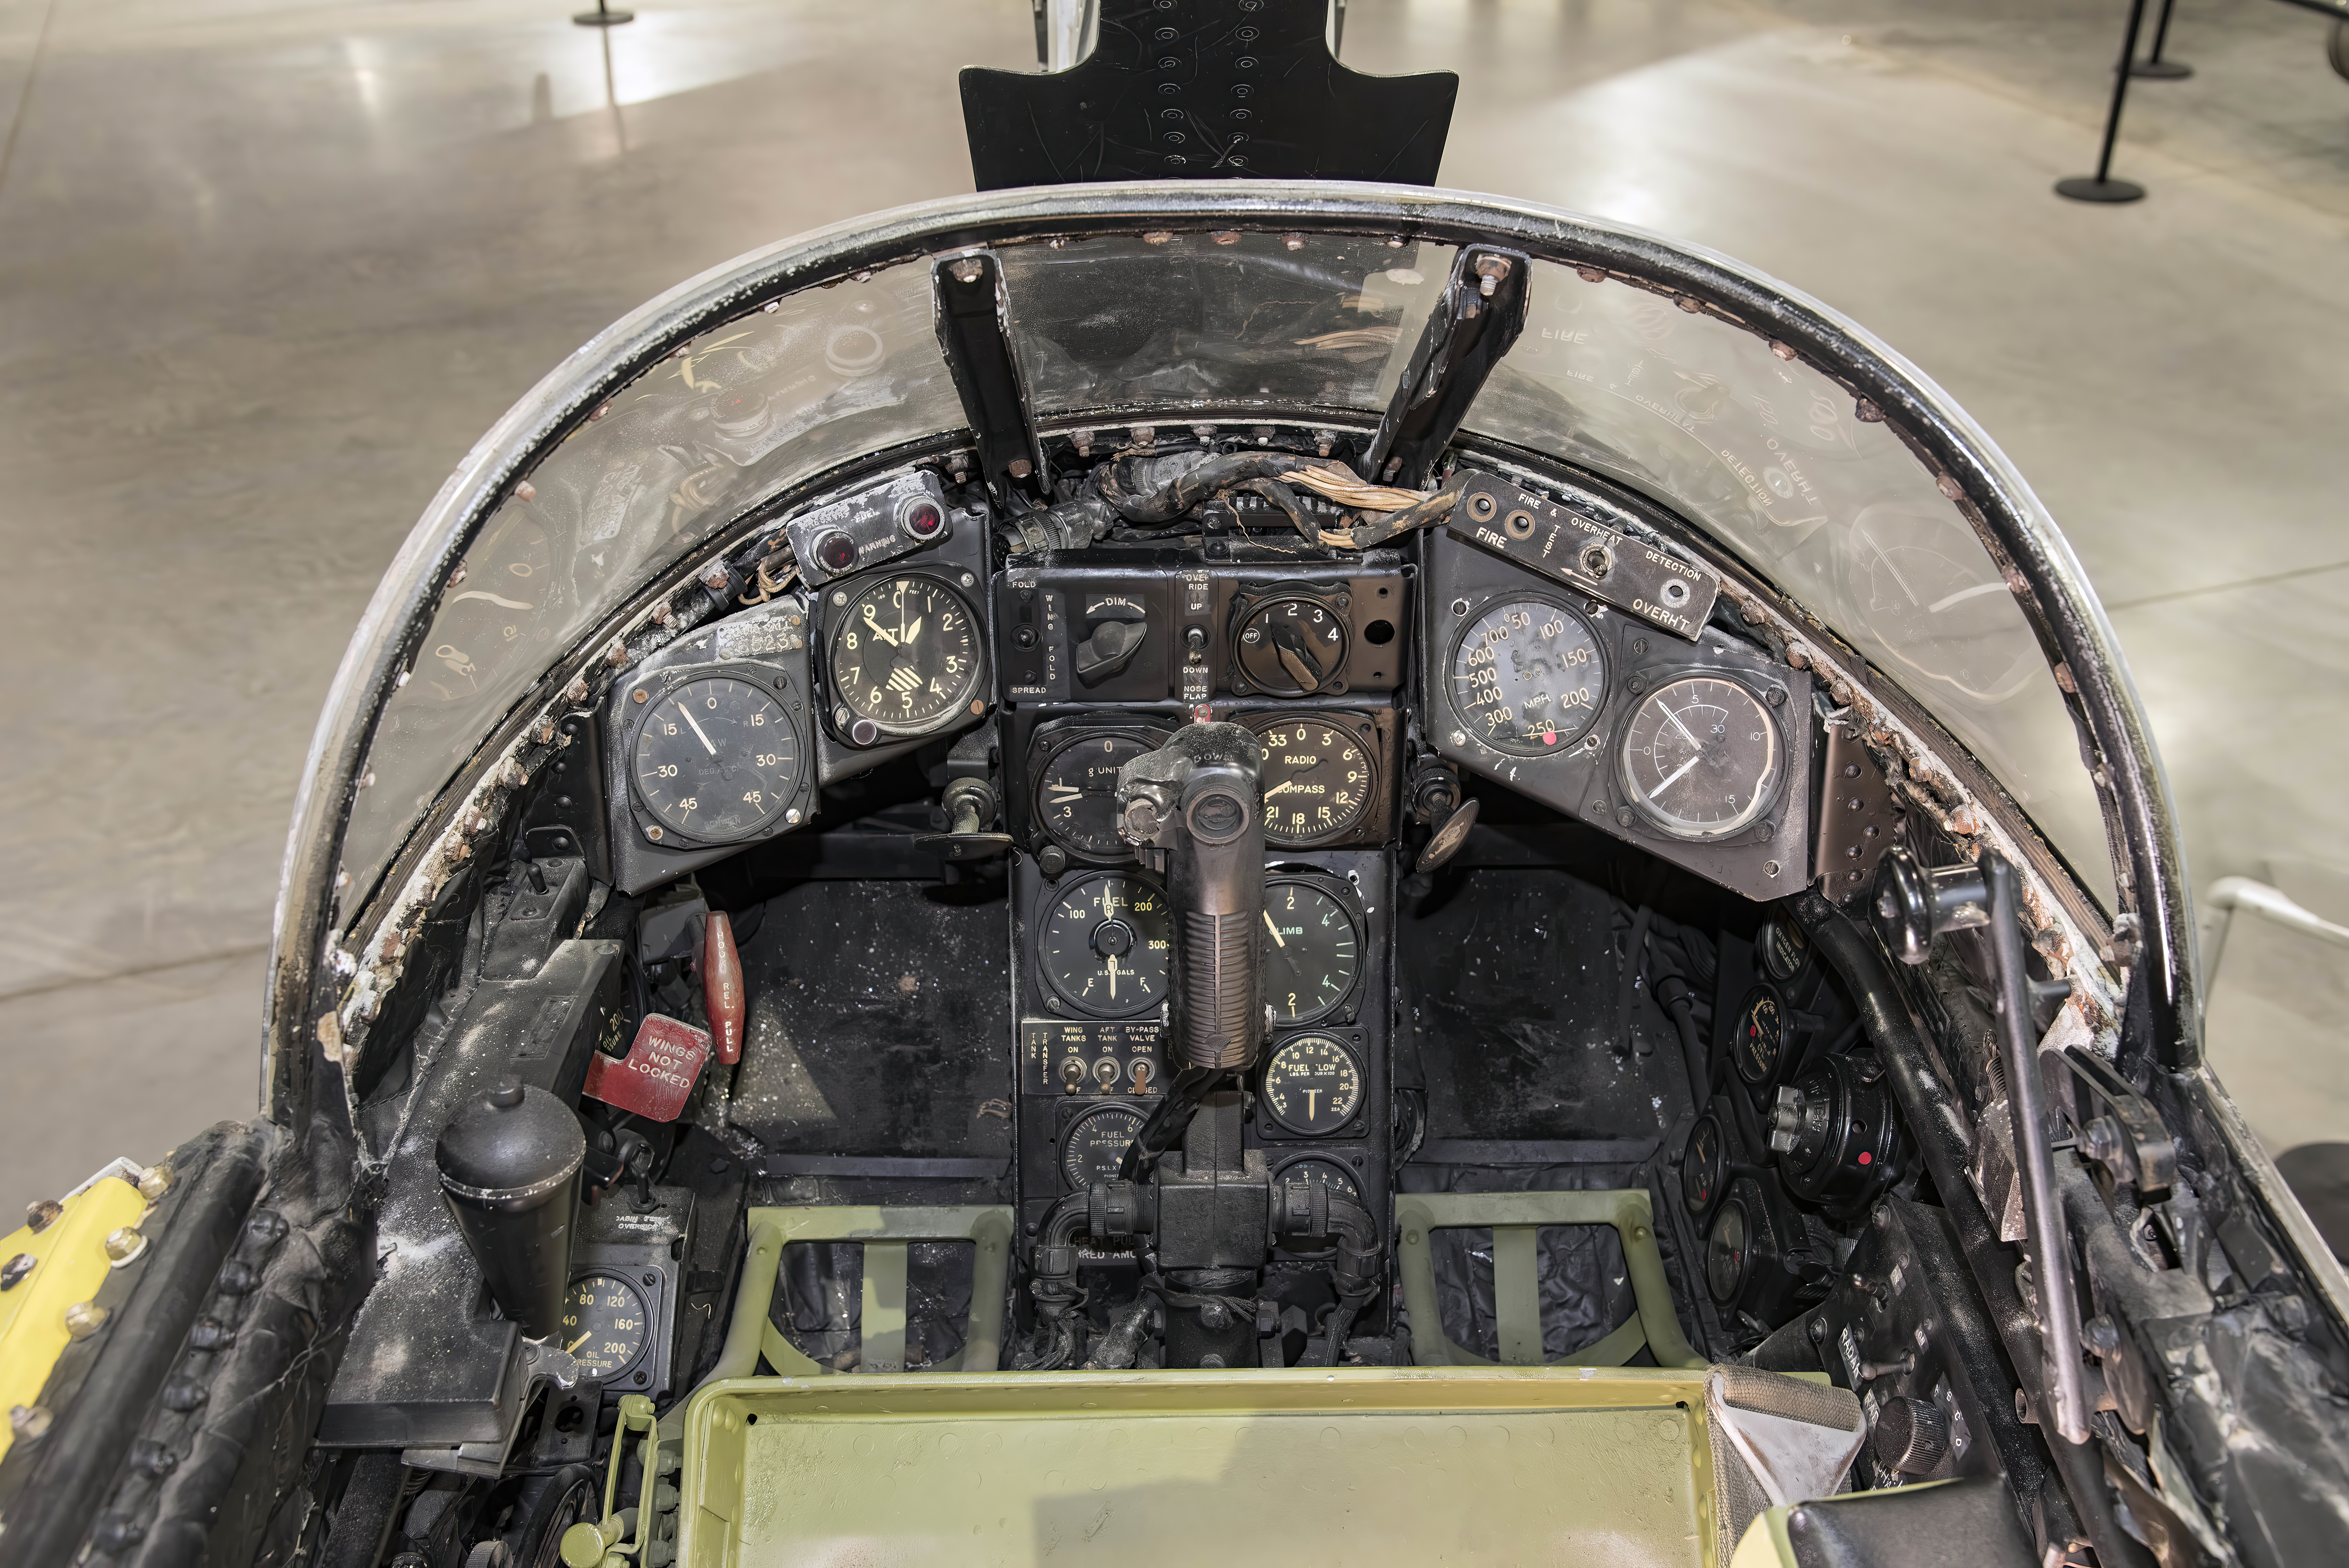 McDonnell XF-85 cockpit